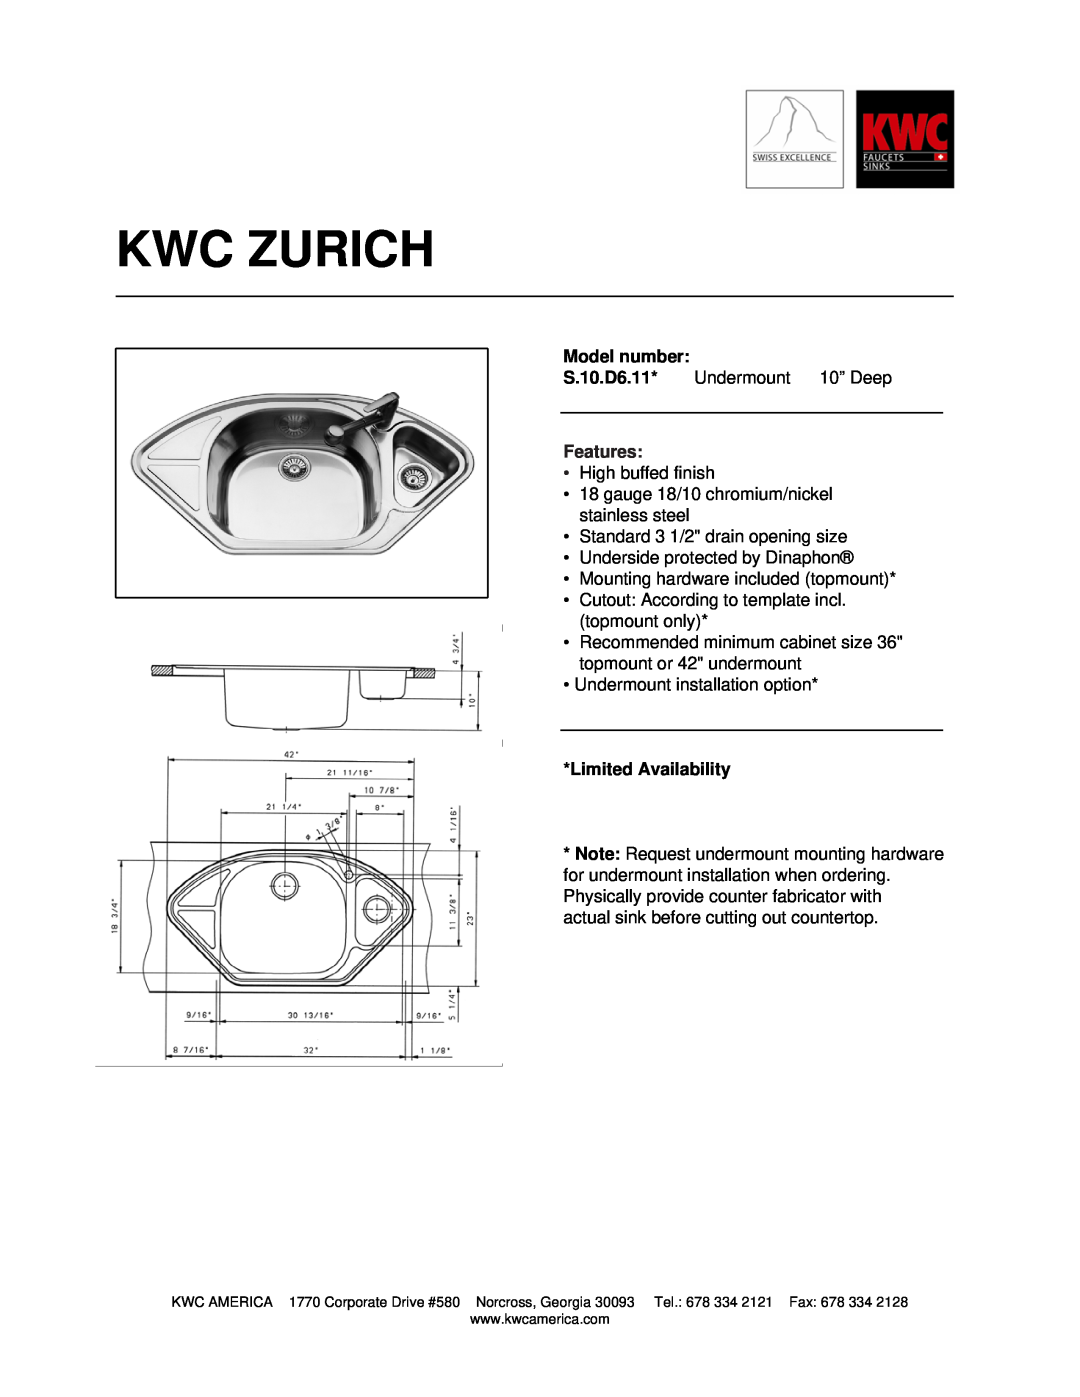 KWC S.10.D6.11 manual Kwc Zurich, Model number, Features, Limited Availability 